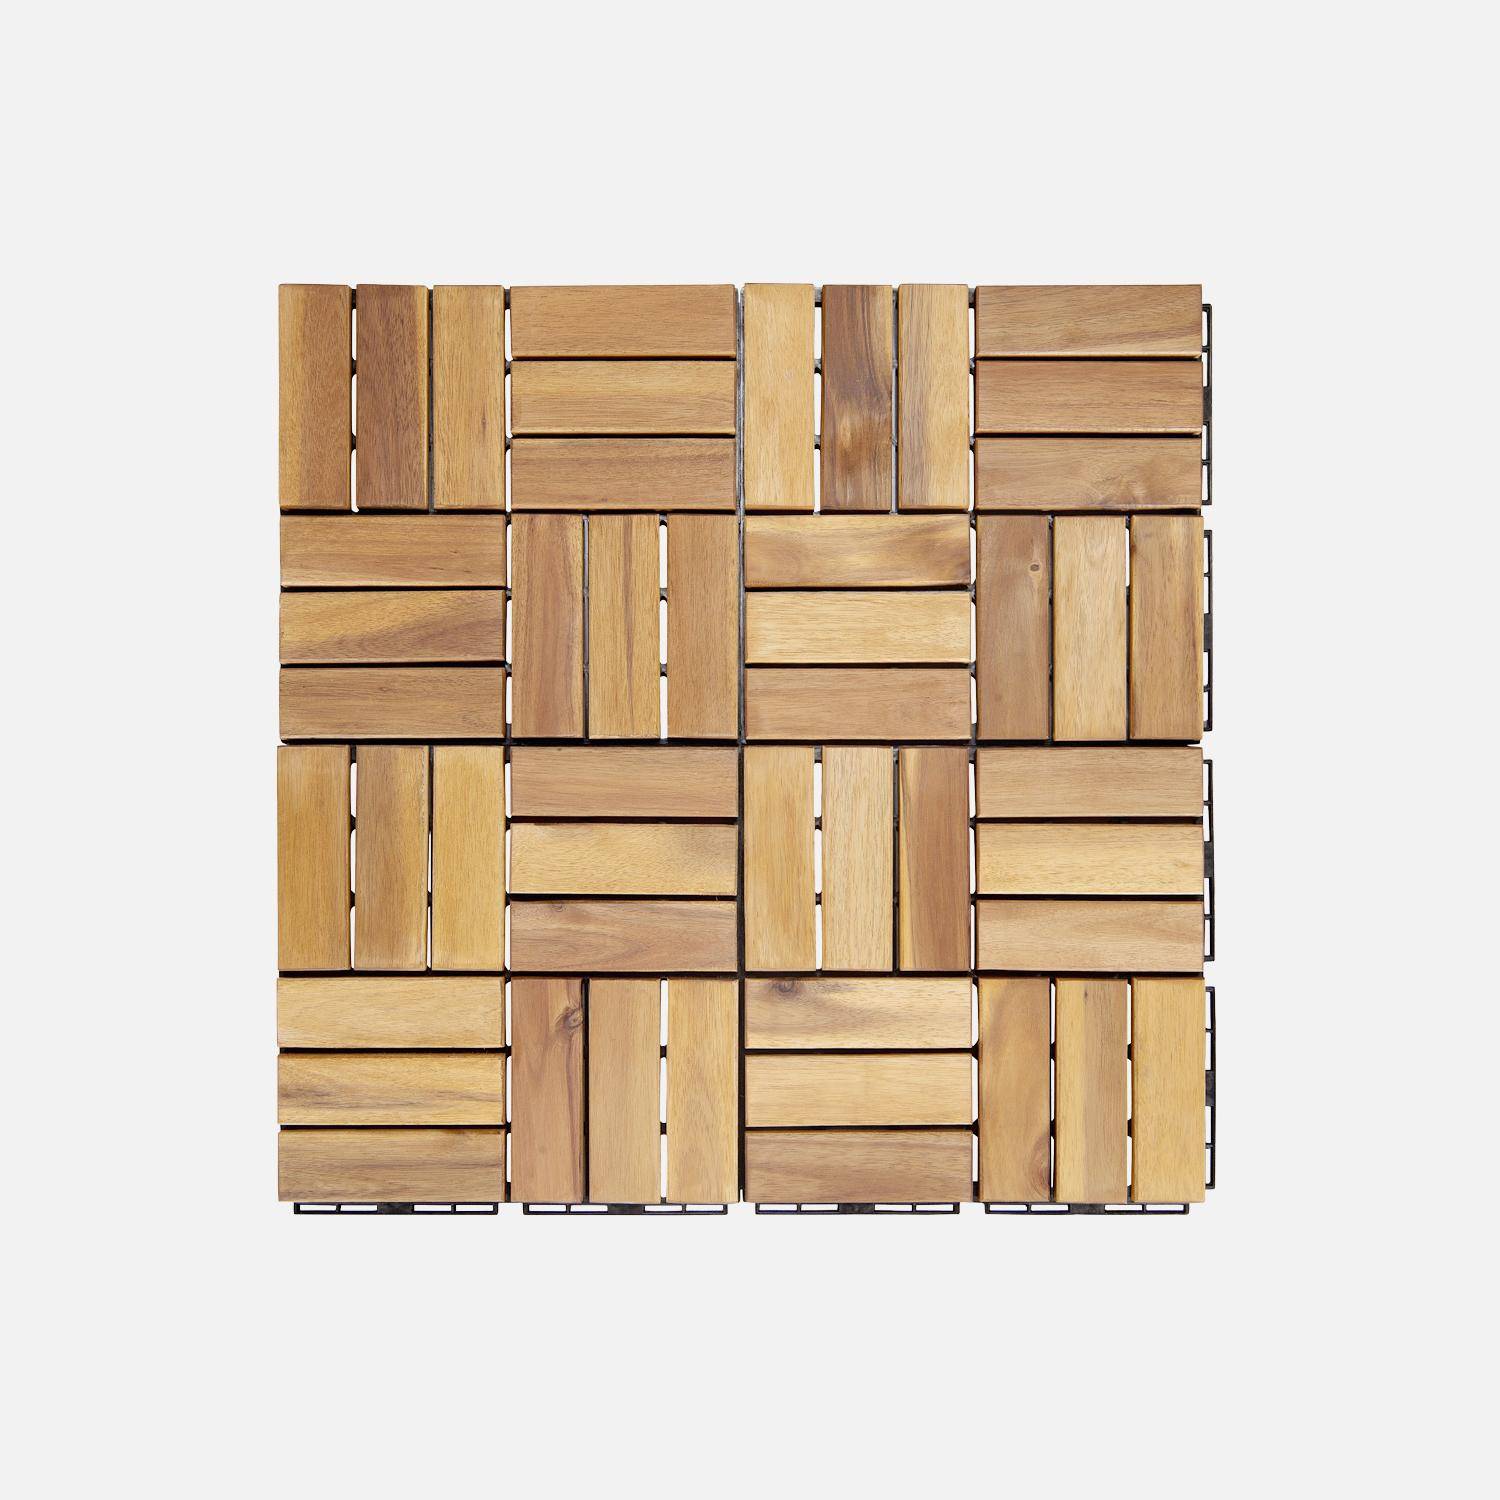 Pack of 10 acacia wood decking tiles 30x30cm, square pattern, clip-on,sweeek,Photo4